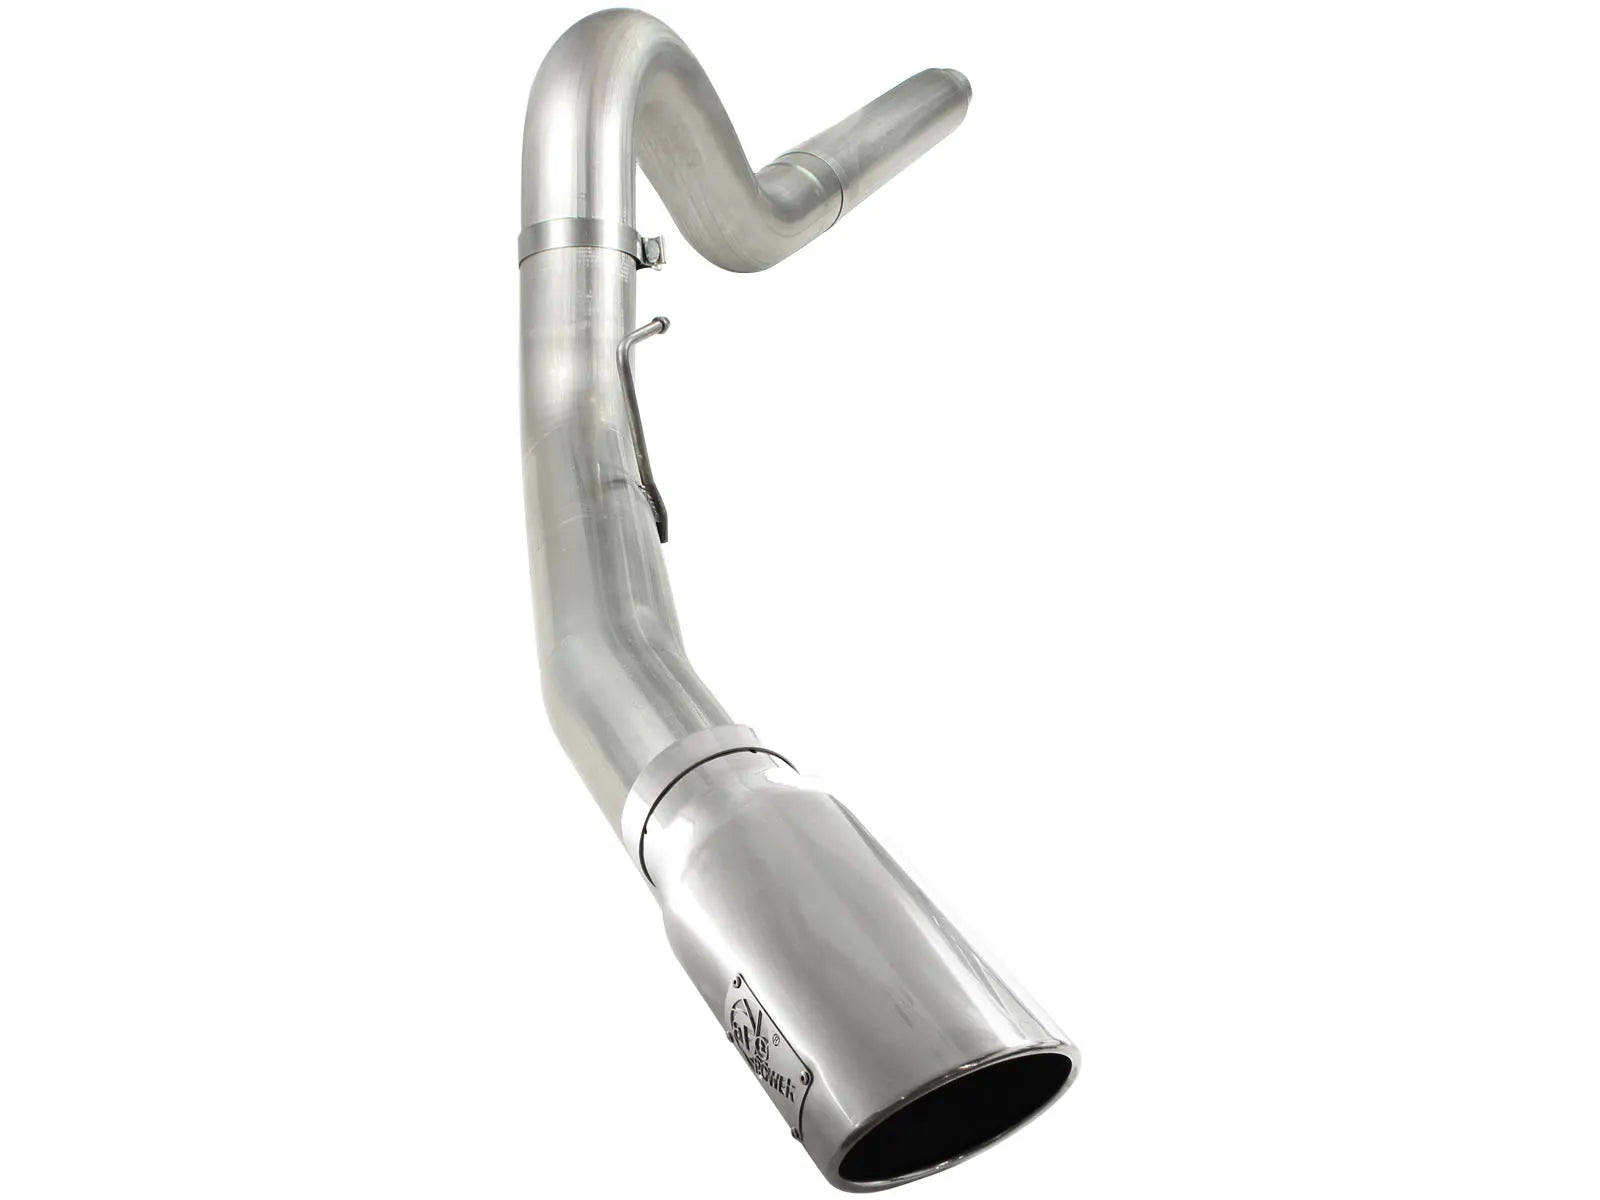 aFe Large Bore-HD DPF-Back Exhaust System for 2008-2010 Ford Trucks (49-43054-P)